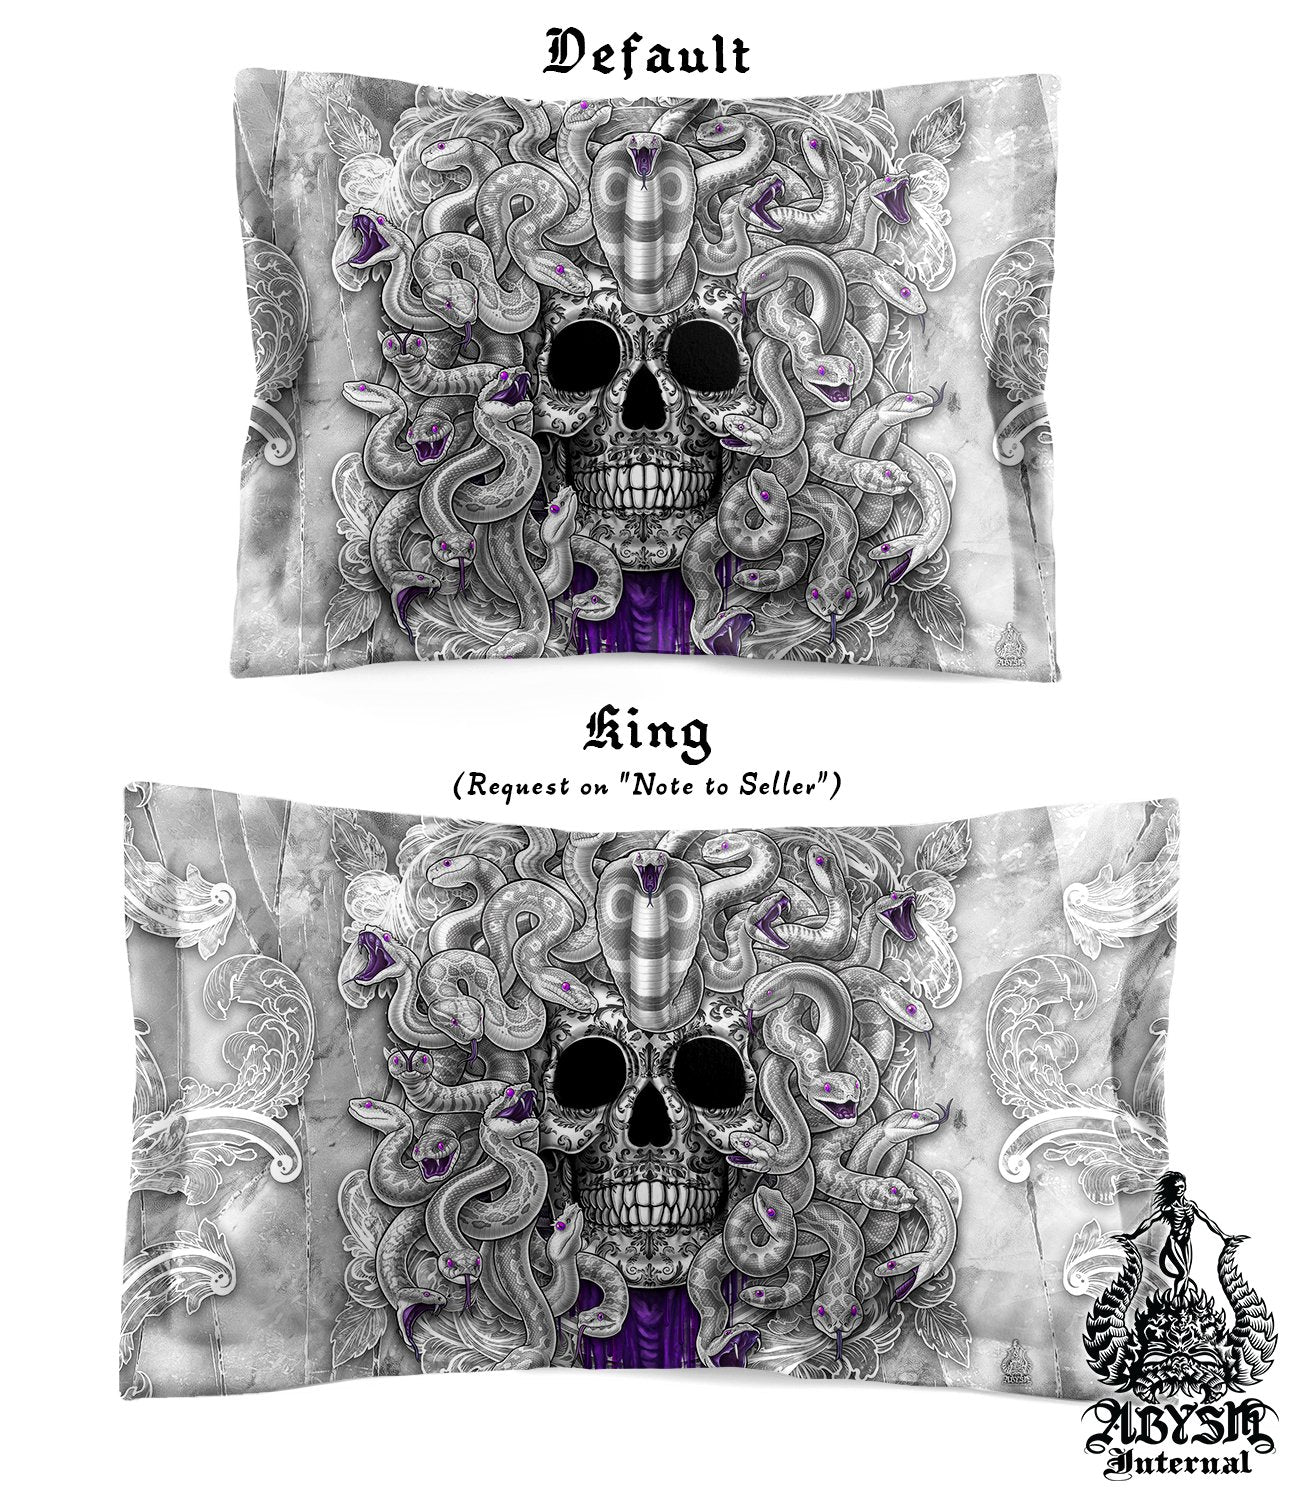 White Goth Bedding Set, Comforter or Duvet, Gothic Bed Cover, Bedroom Decor, King, Queen & Twin Size - Purple, Medusa Skull, 4 Faces - Abysm Internal